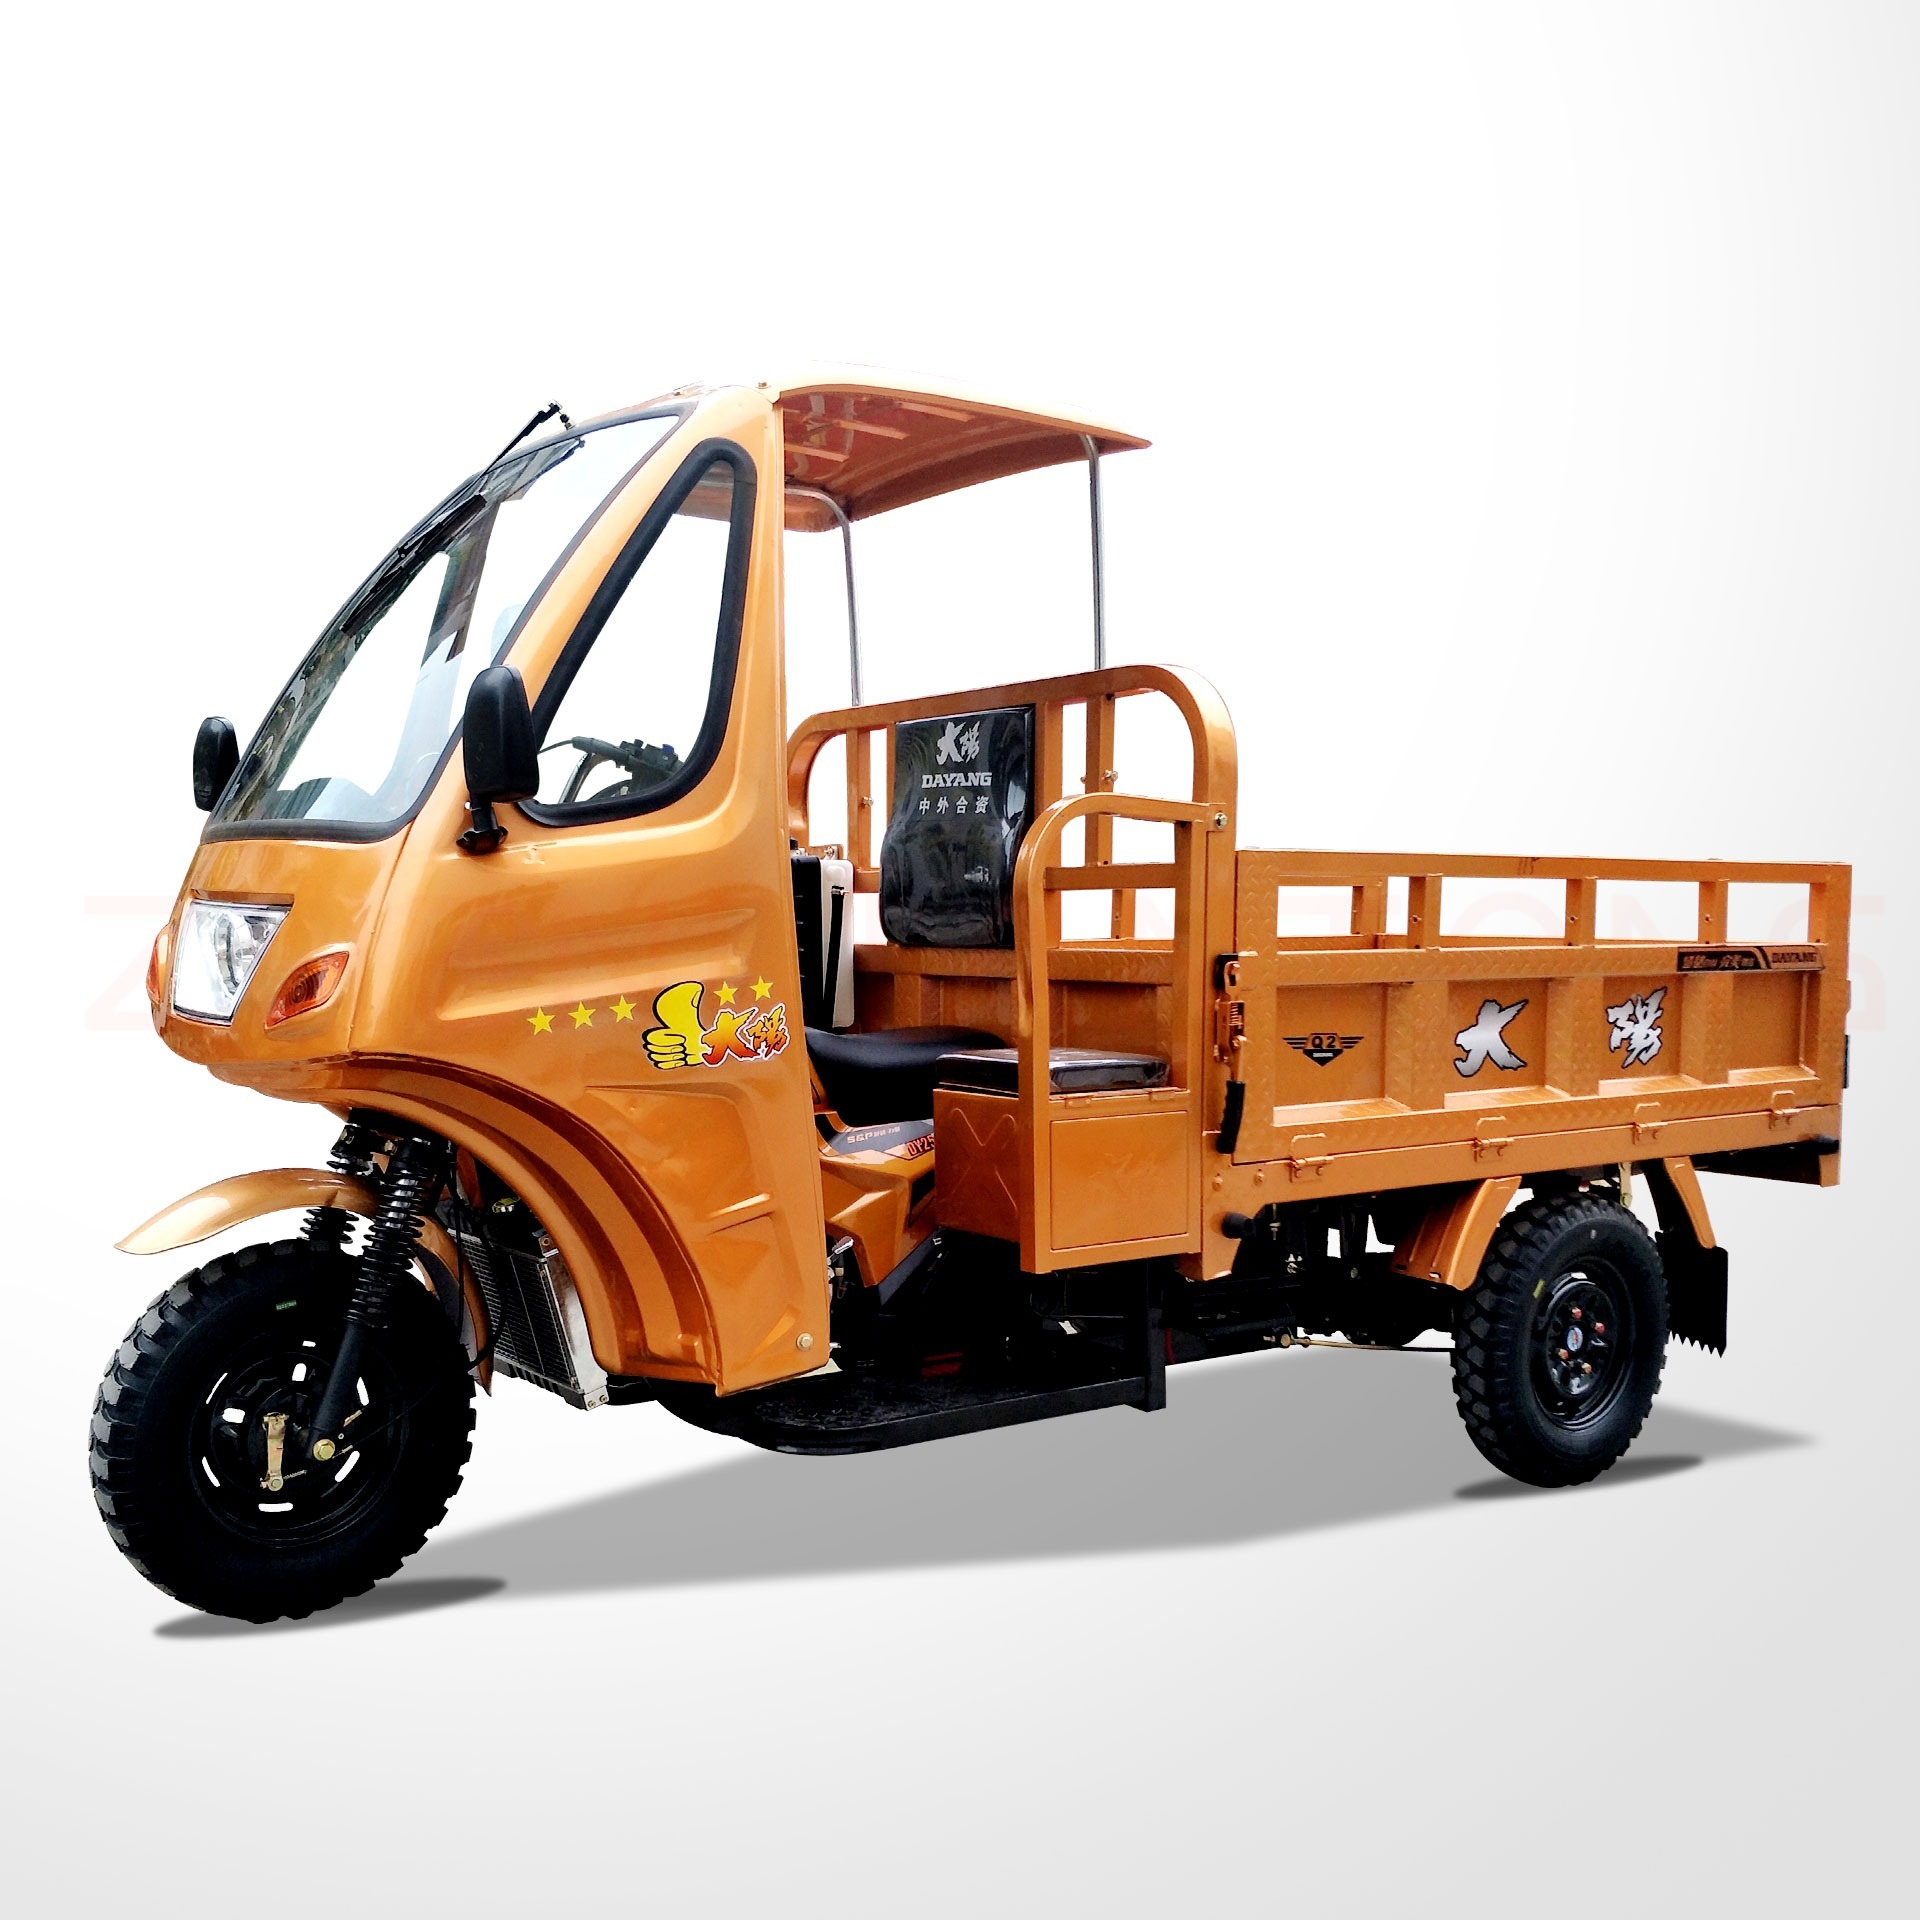 Q2-S1 Semi cabin cargo tricycle with powerful engine of 250cc